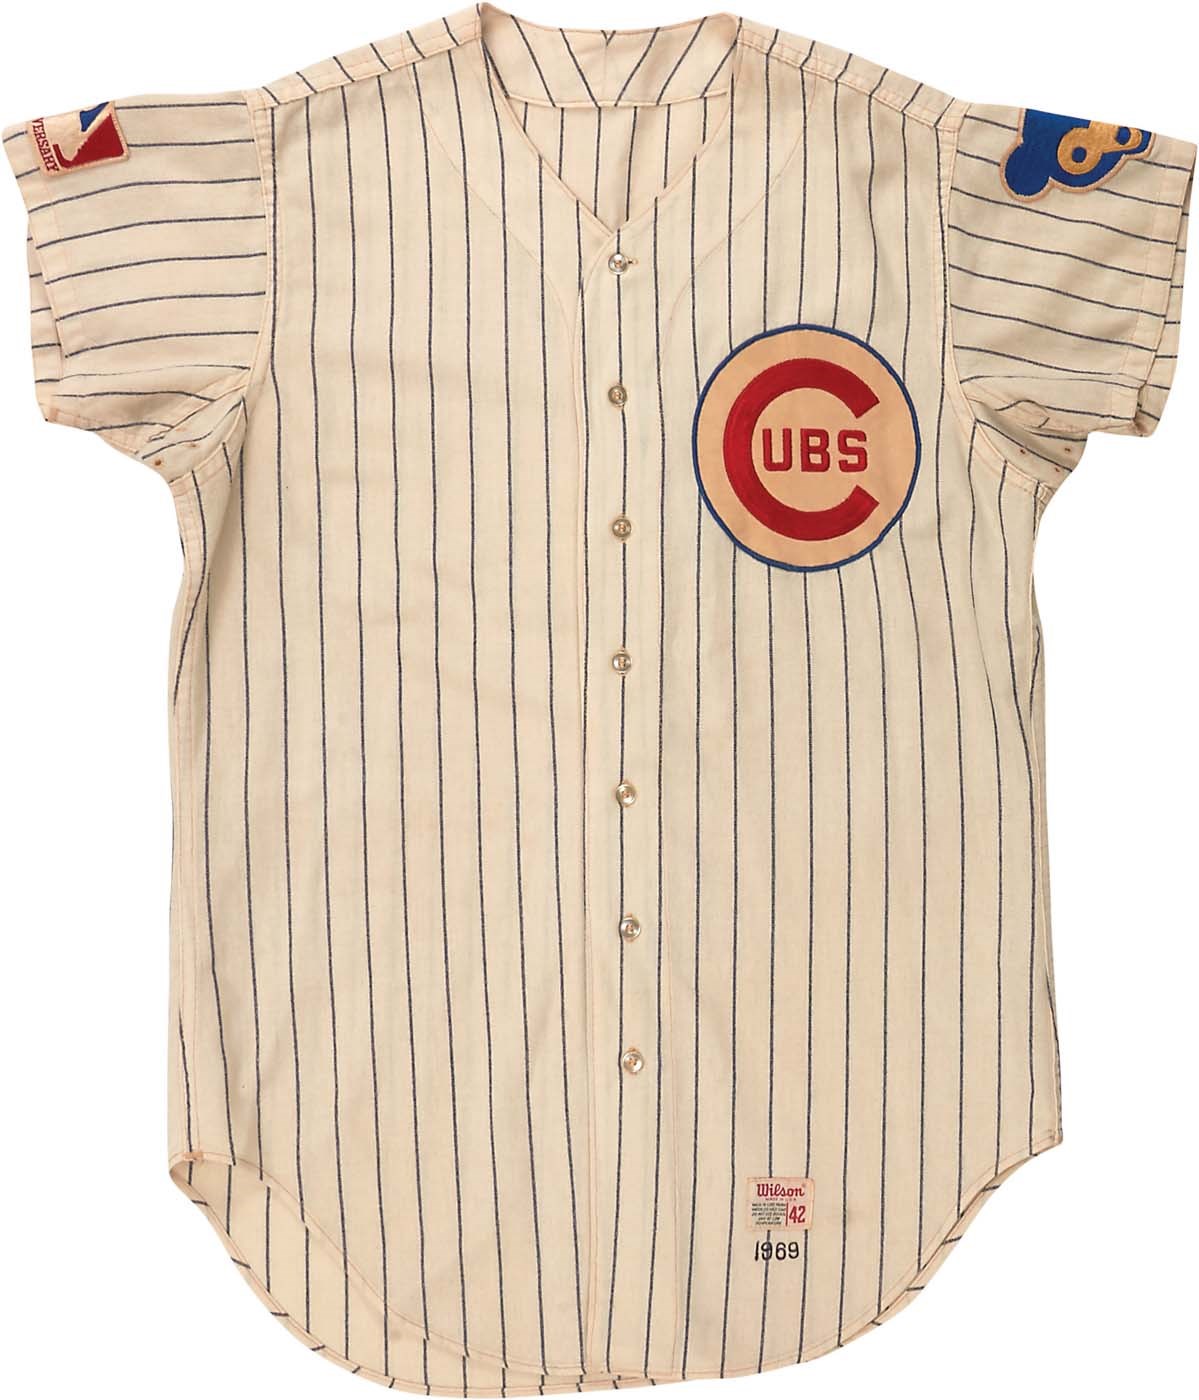 - 1969 Pete Reiser Game Worn Cubs Jersey & Fergie Jenkins Game Worn Pants "Uniform" Given to Cubs Scout (Photo-Matched)